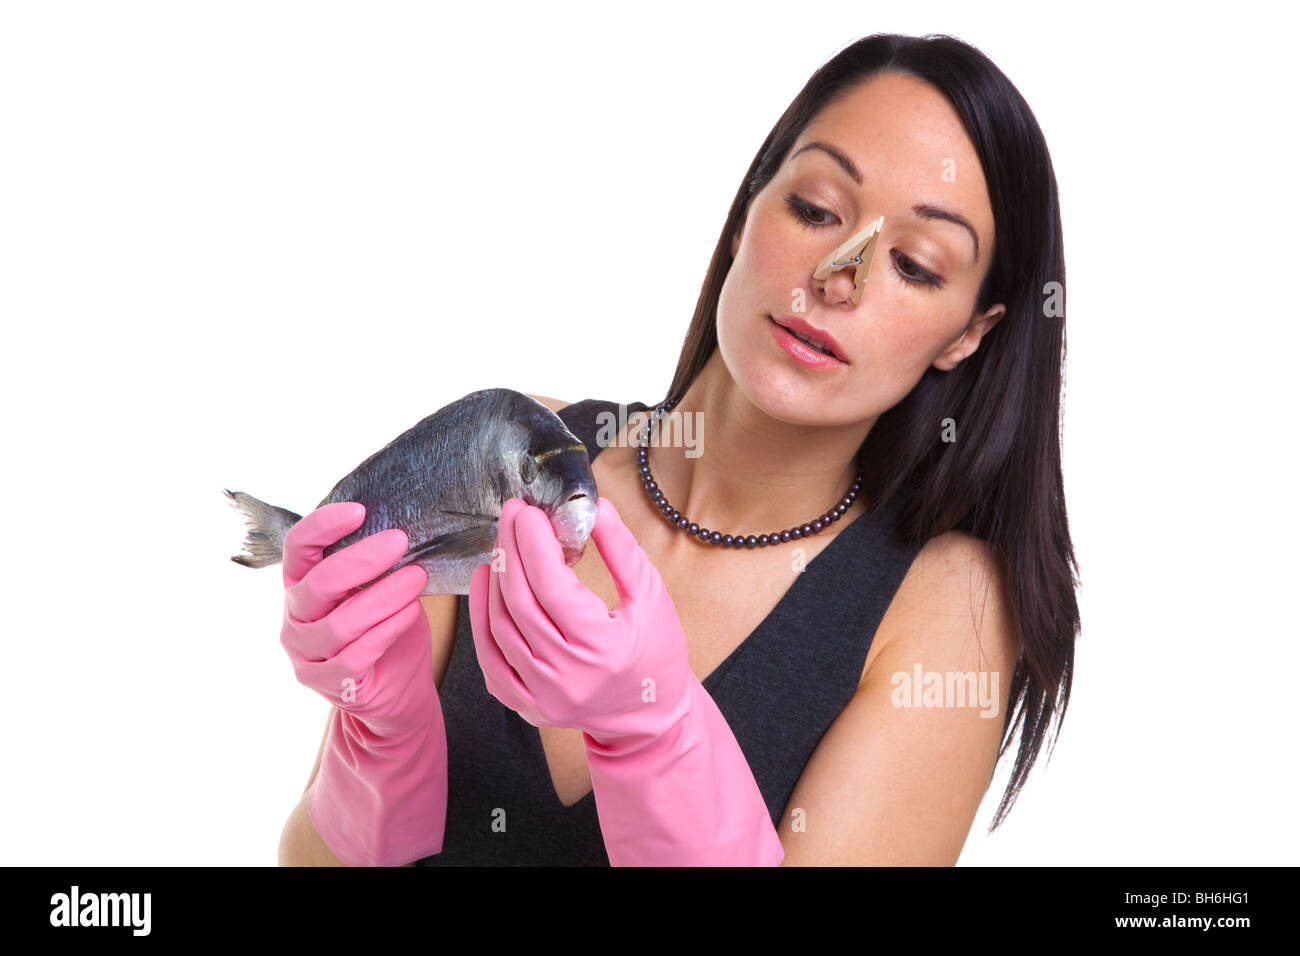 A woman wearing rubber gloves holding a raw fish, isolated on a white background Stock Photo